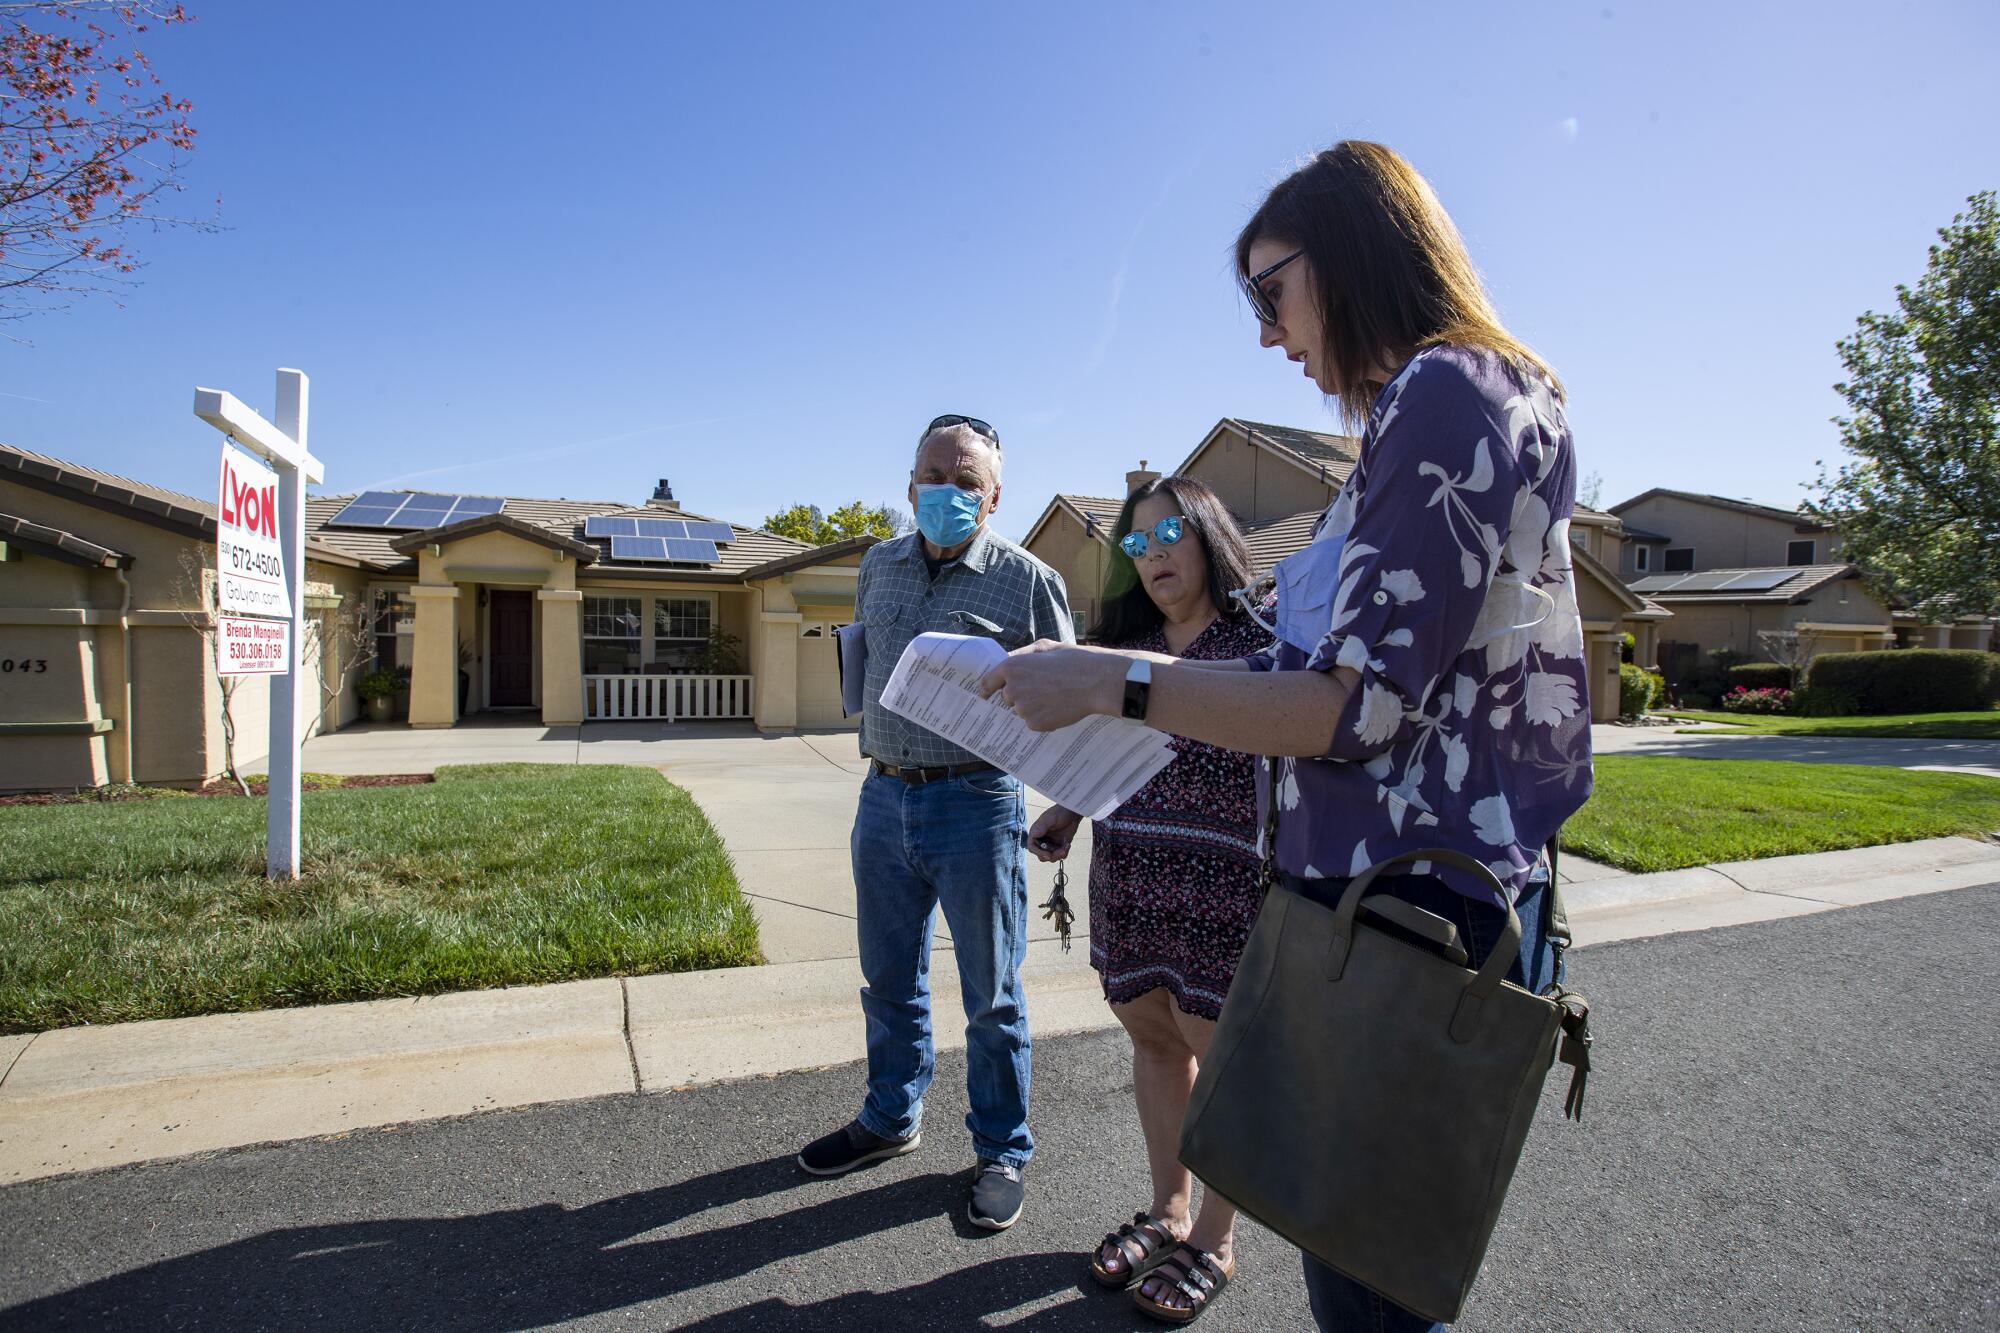 Real estate agent Morgan Larson, right, prepares to show a home to prospective buyers Gary and Karen Edmondson.